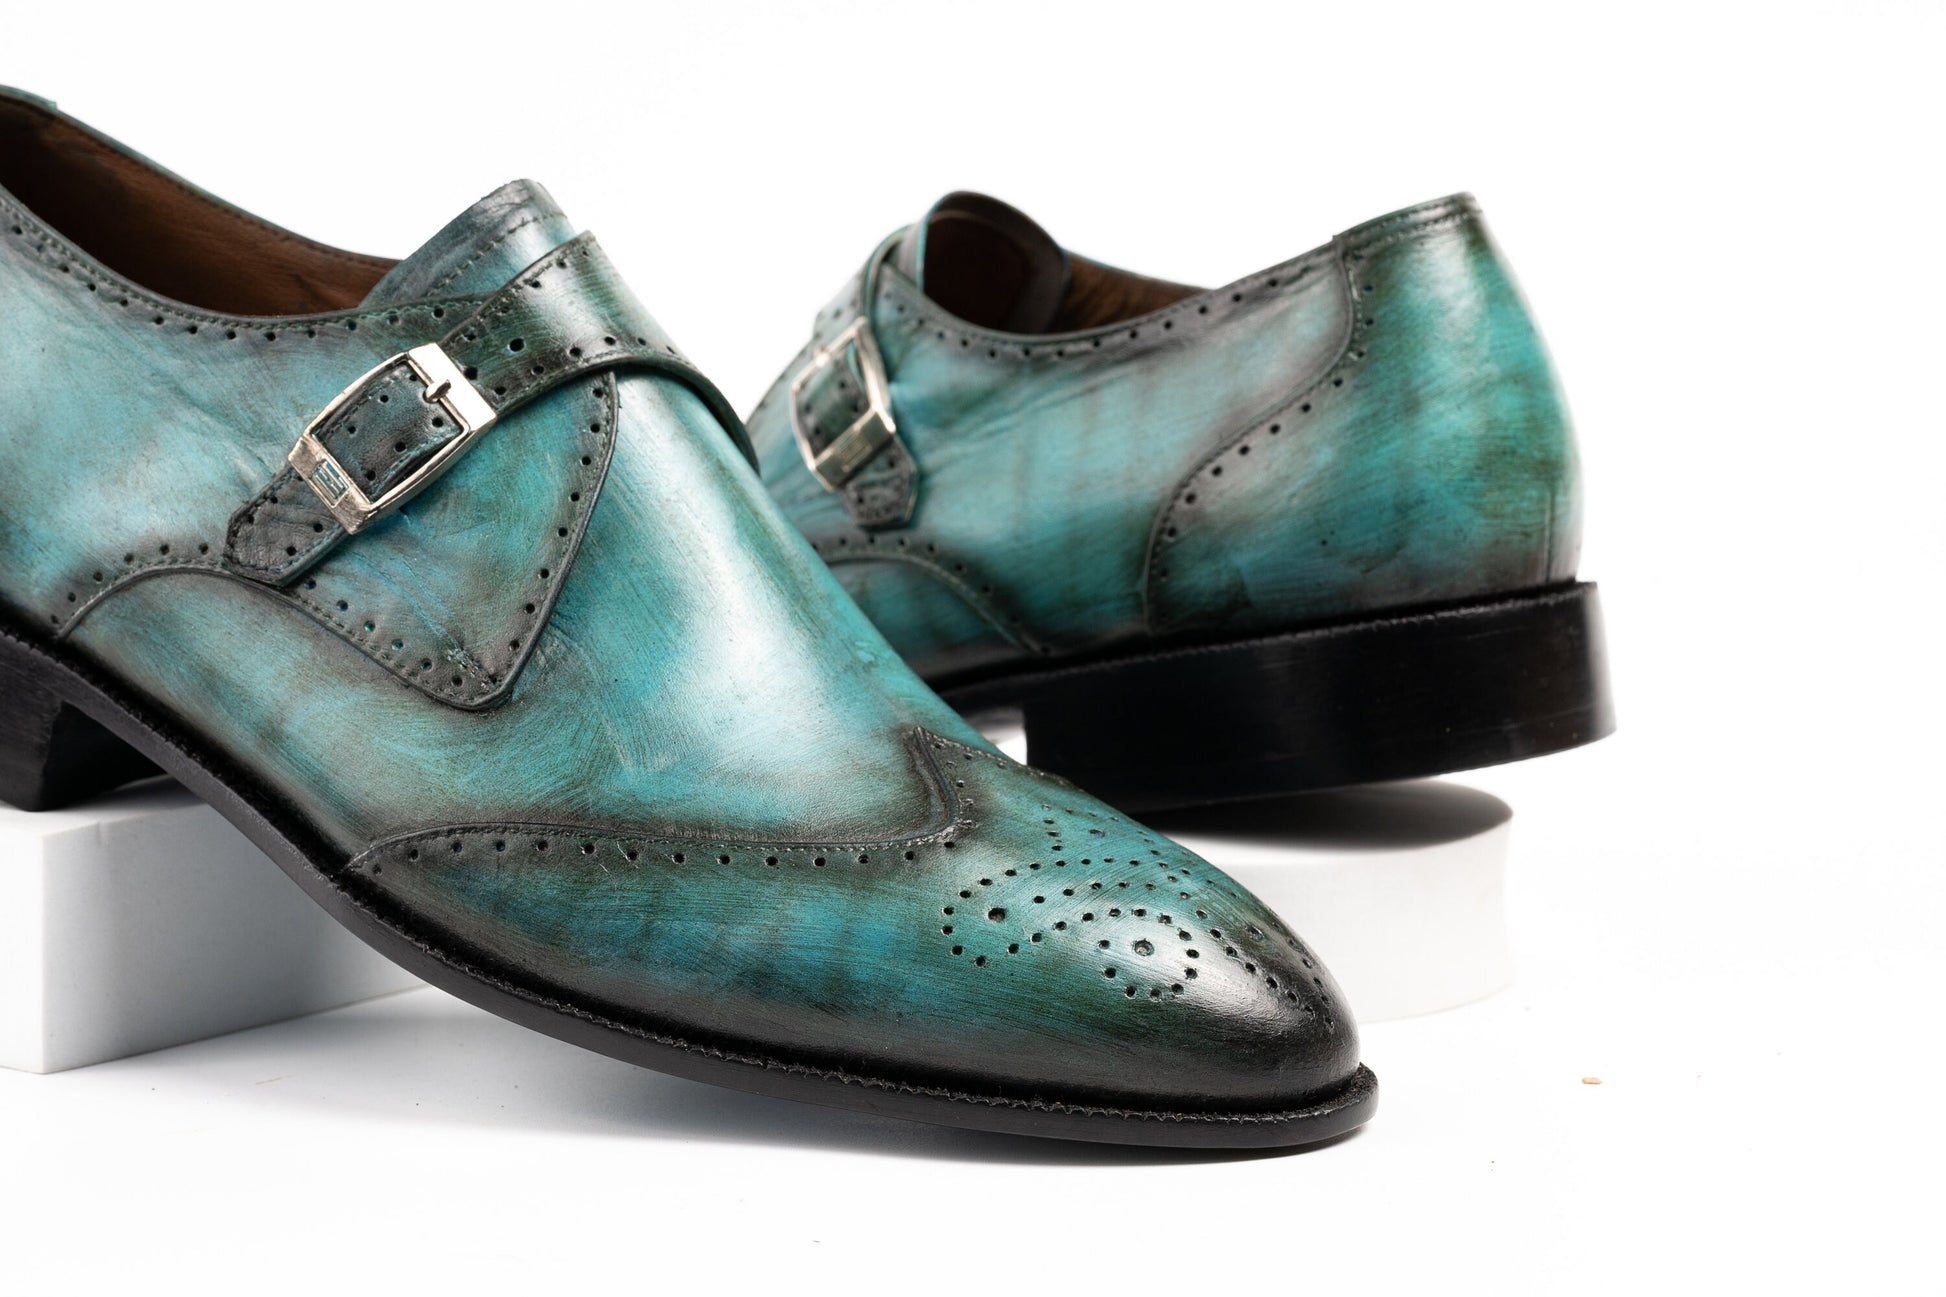 Turquoise Colored Single buckle Wingtip Monk Strap Patina Shoes Made using Crust Leather with Hand Dye Finish Woozy Store